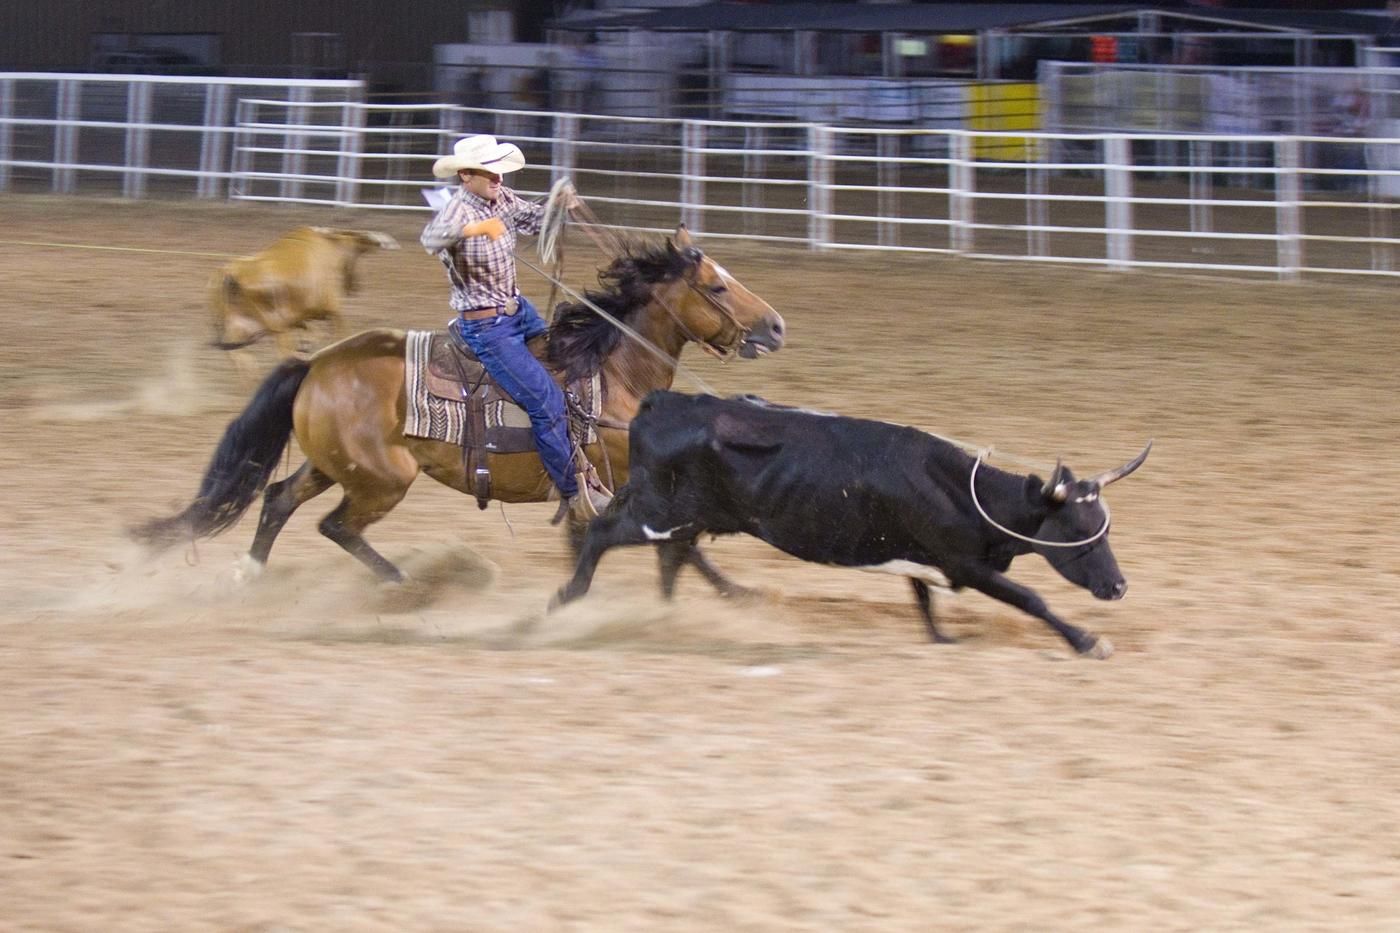 pro rodeo cowboy on horse chasing cow